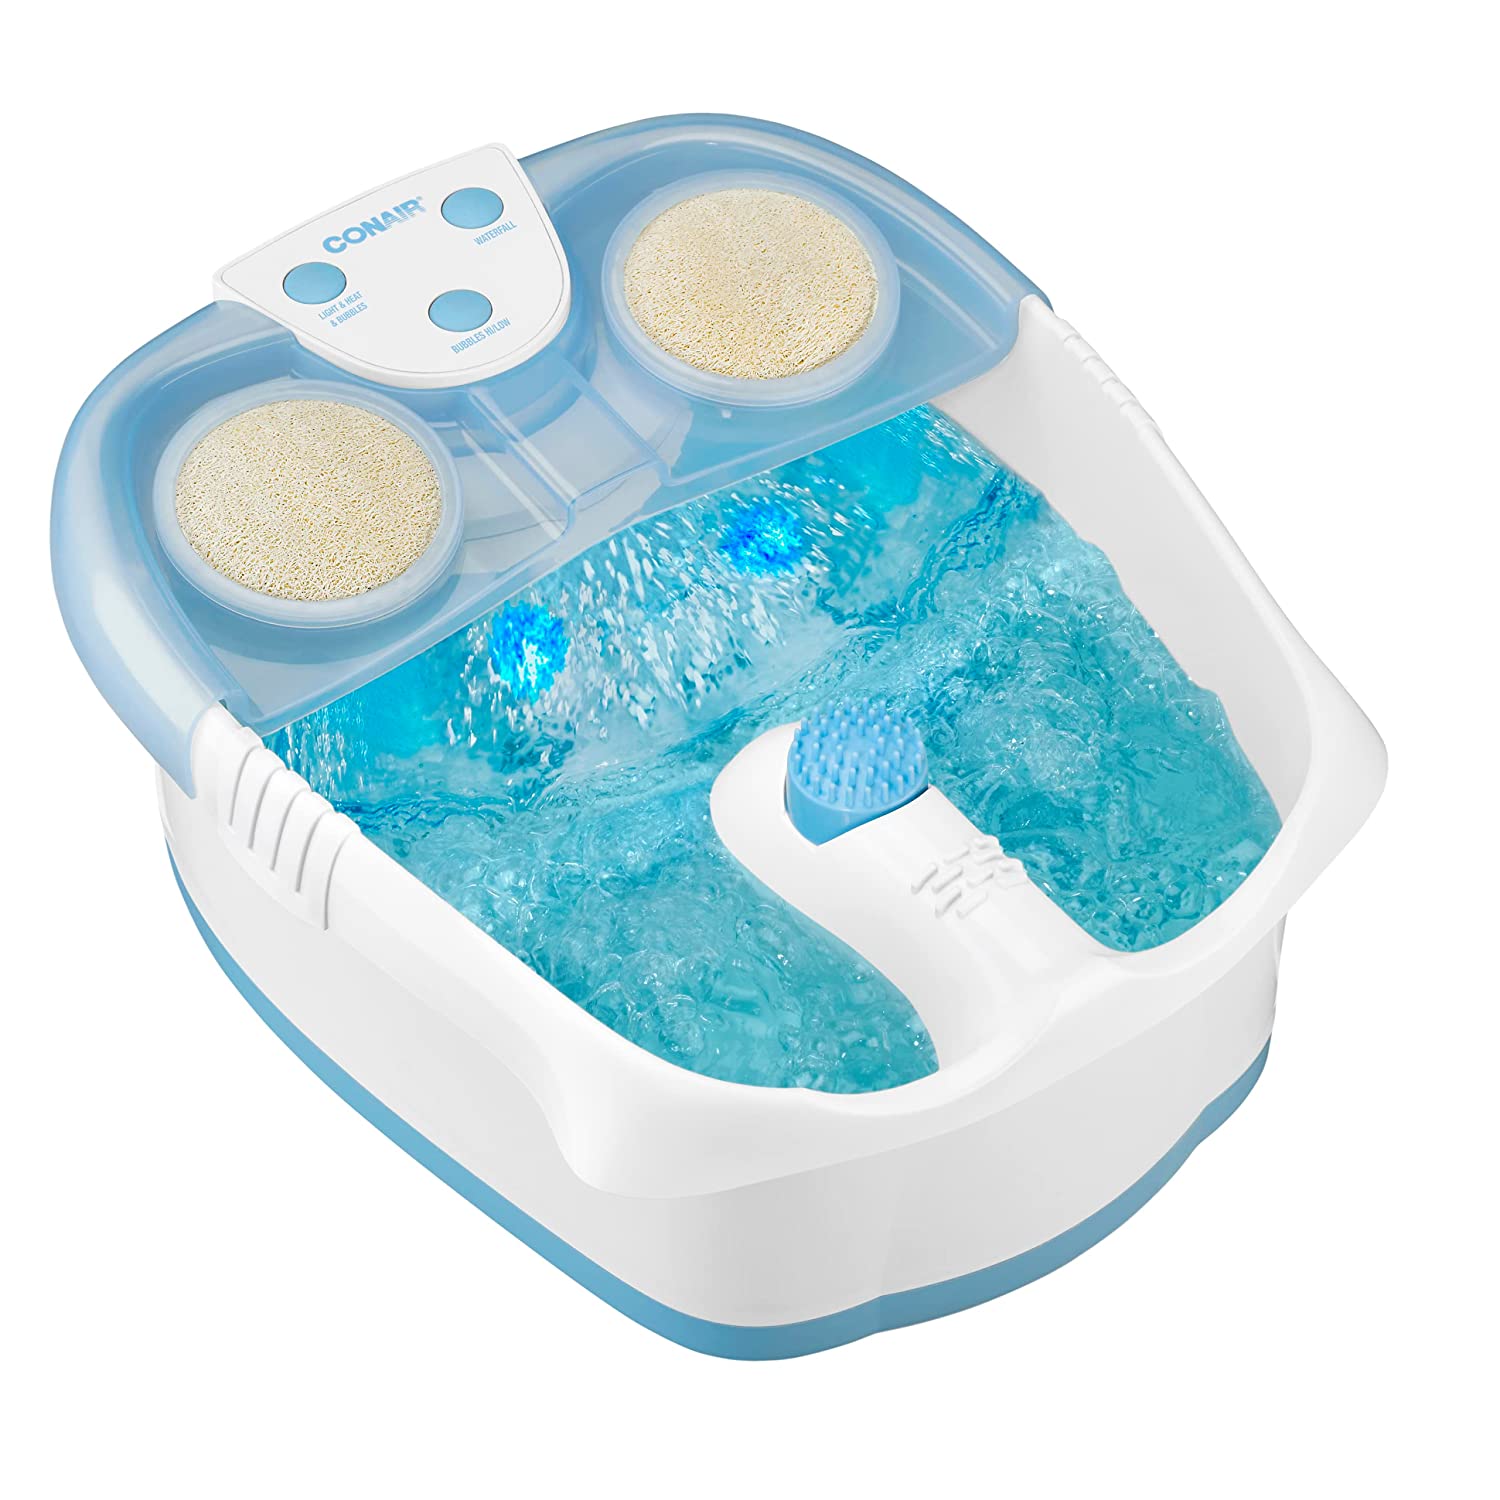 Conair Active Life Waterfall Foot Spa with Lights and Bubbles, Blue